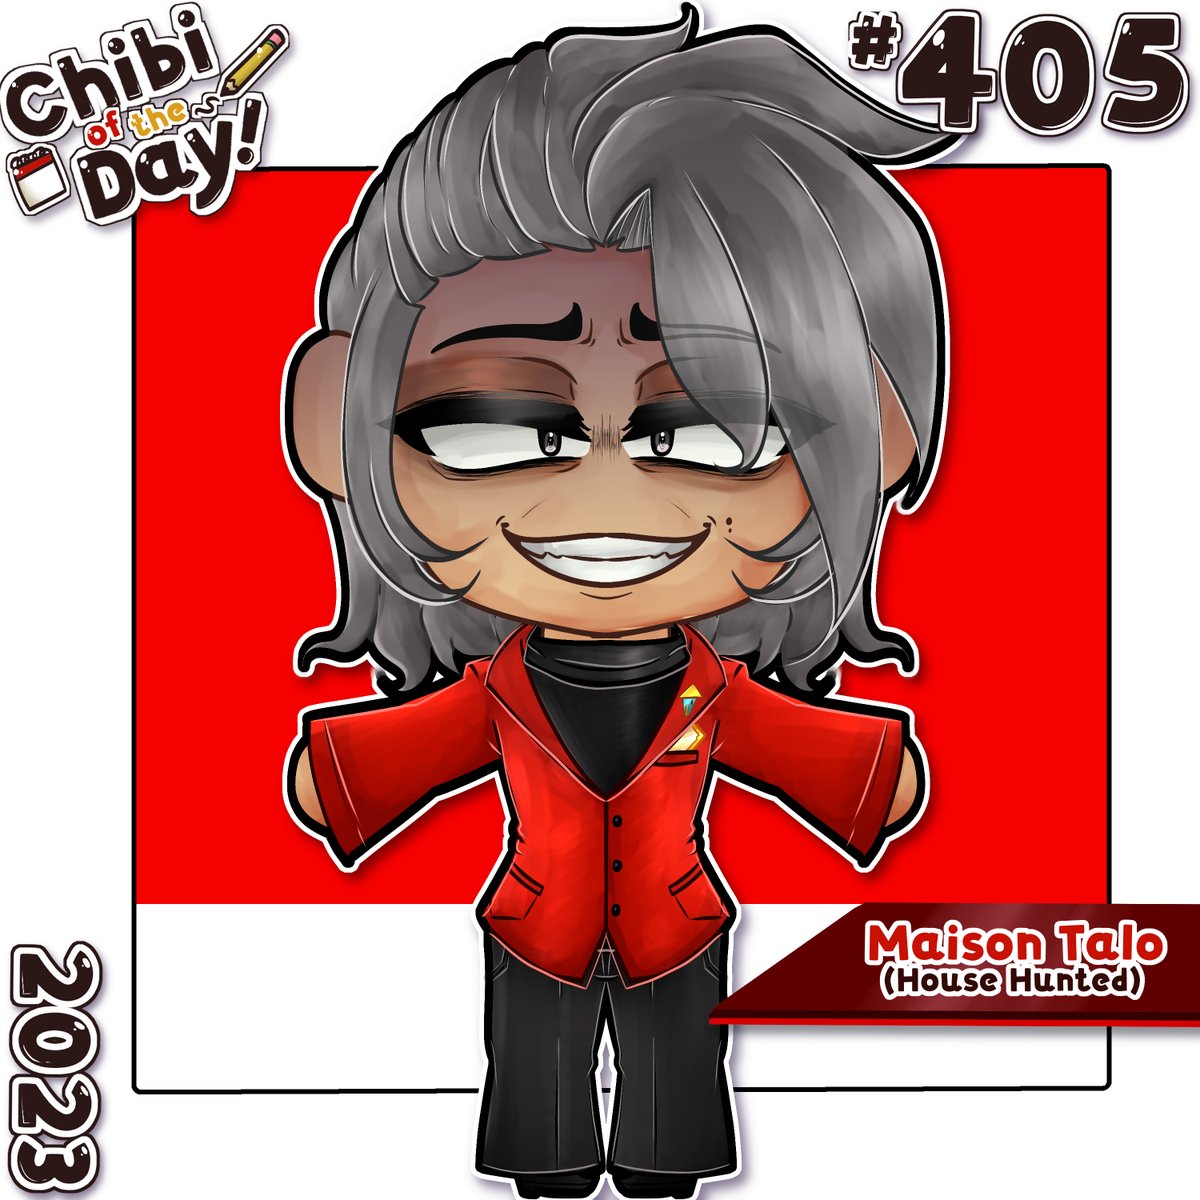 [House Hunted] Maison Talo

Chibi of the Day style C♤MMS are OPEN on my K♤-FI

#artmoots #ArtistOnTwitter #Chibi #VArtist #commissionsopen #VTuberUprising #VtuberEN #VtuberSupport #PHVtuber #Vtuberart #vtubercommissions #househunted #Househuntedgame #maisontalo